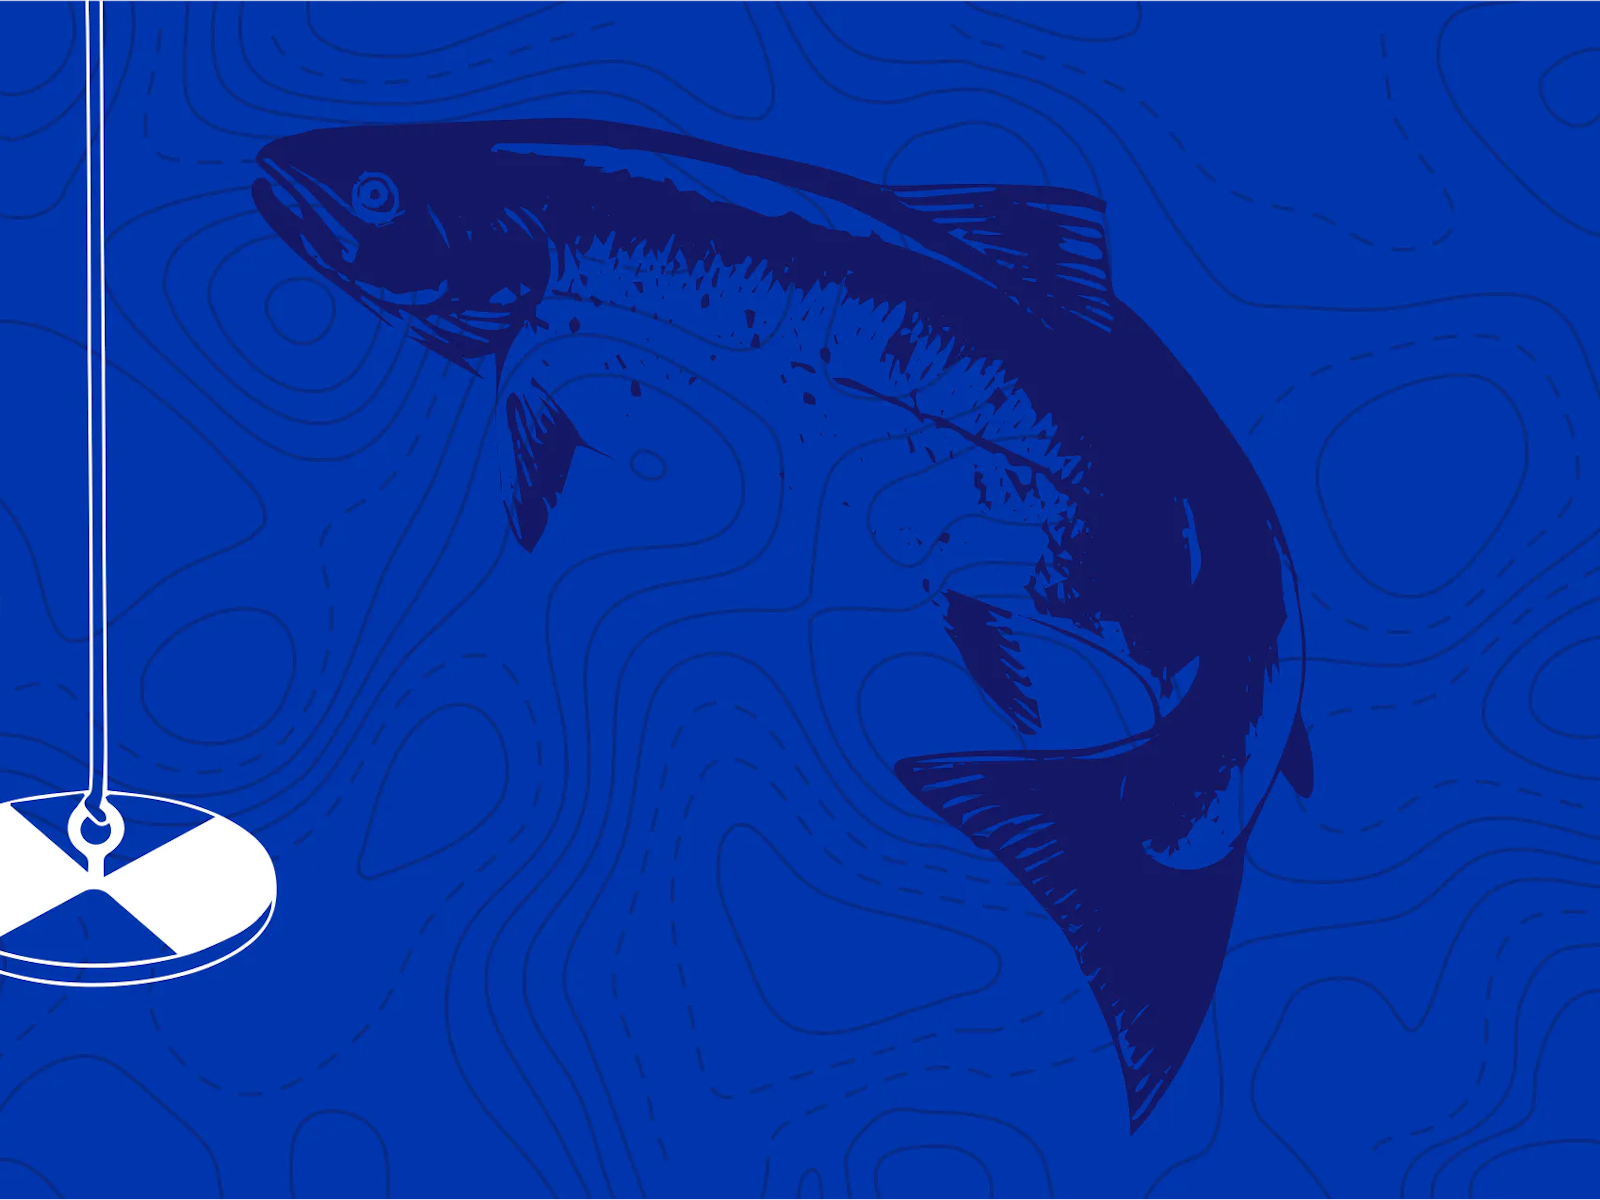 Black graphic of a fish against a blue background